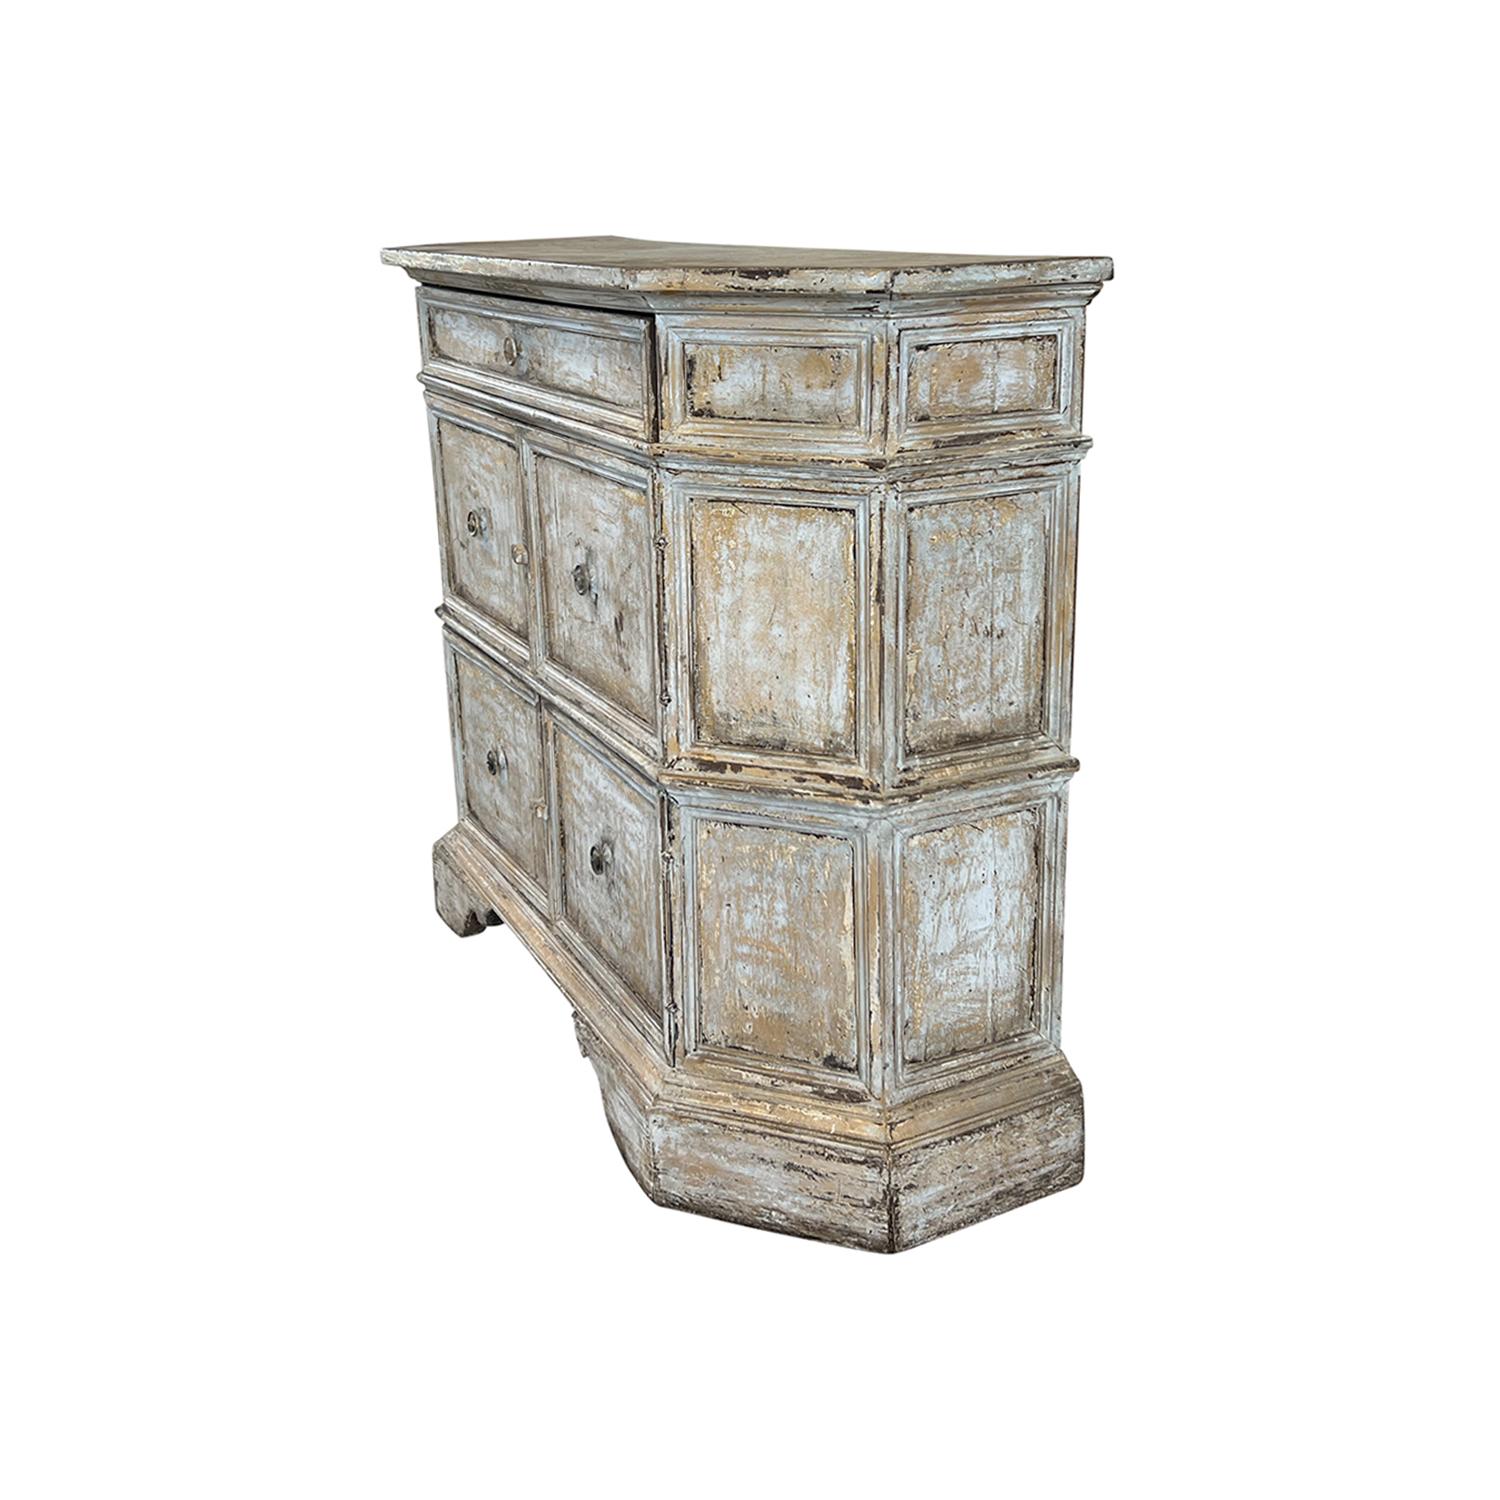 Hand-Carved 19th Century Italian Pastel Blue Pinewood Credenza - Antique Tuscan Cabinet For Sale